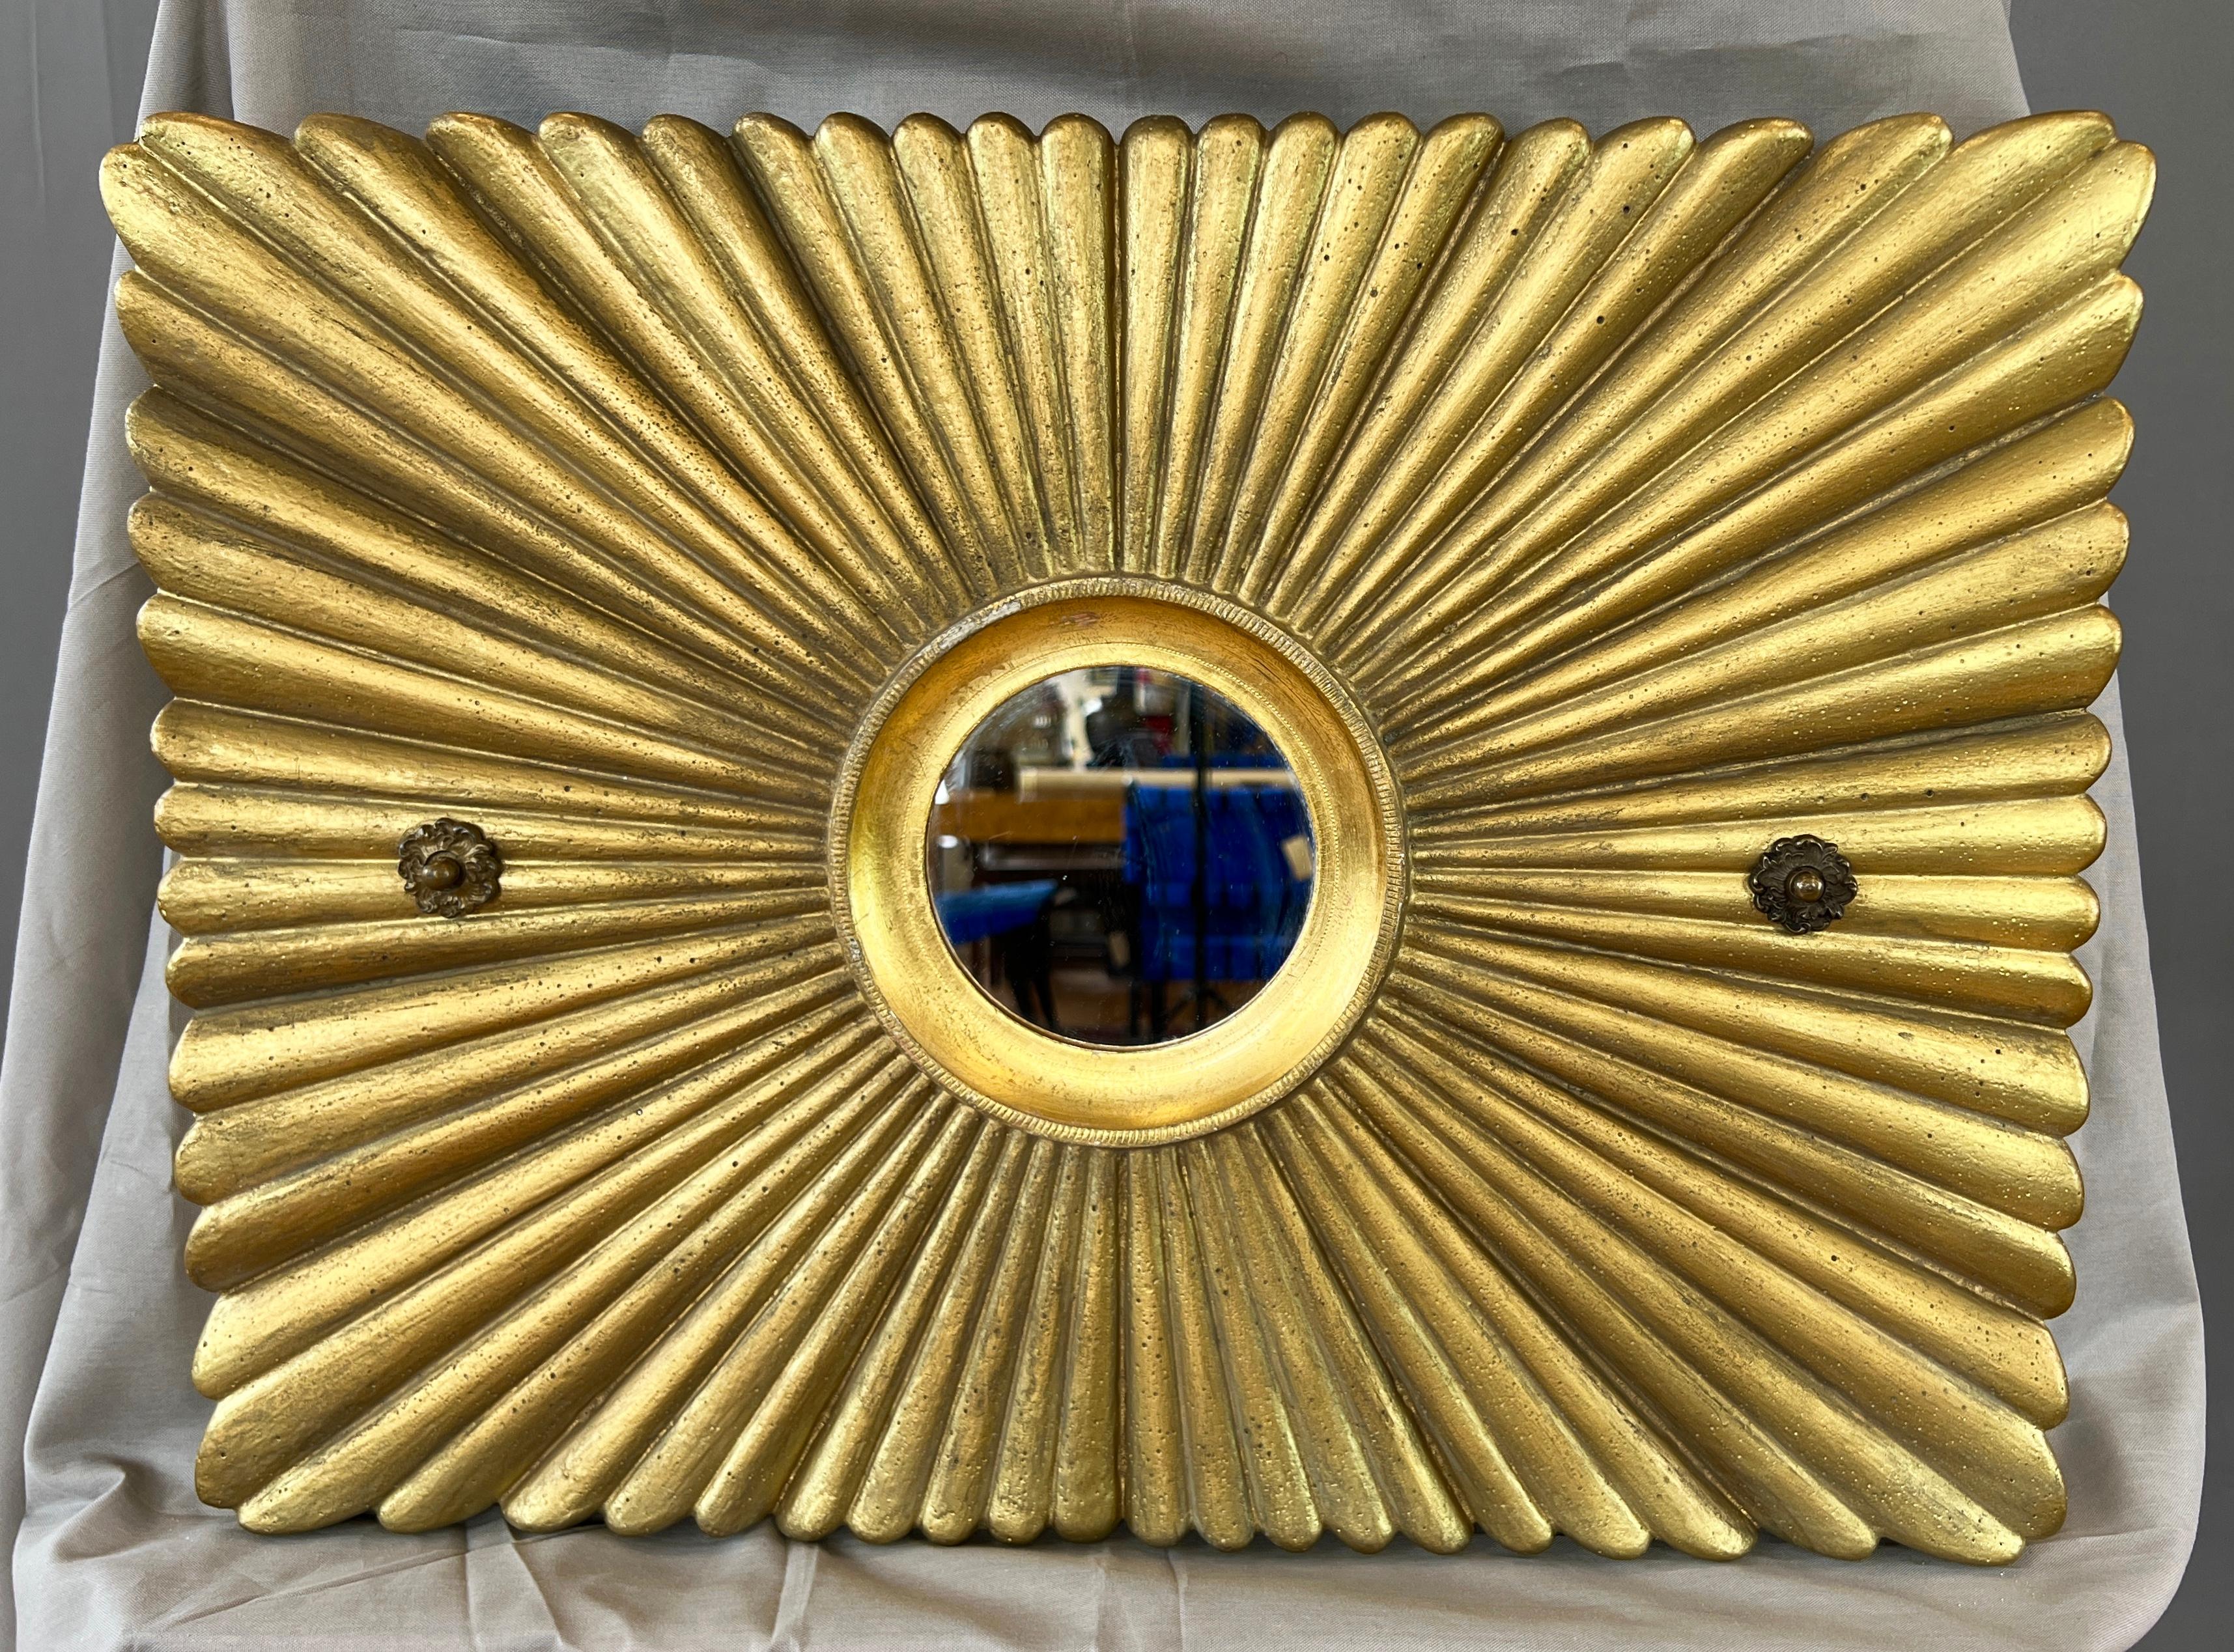 A circa 1920 Art Deco gold painted solid plaster sunburst decoration with gilt metal-framed mirror from an upscale movie theater or playhouse.

A classic décor element rendered in clean, timeless style, with a very dimensional rectangular sunburst